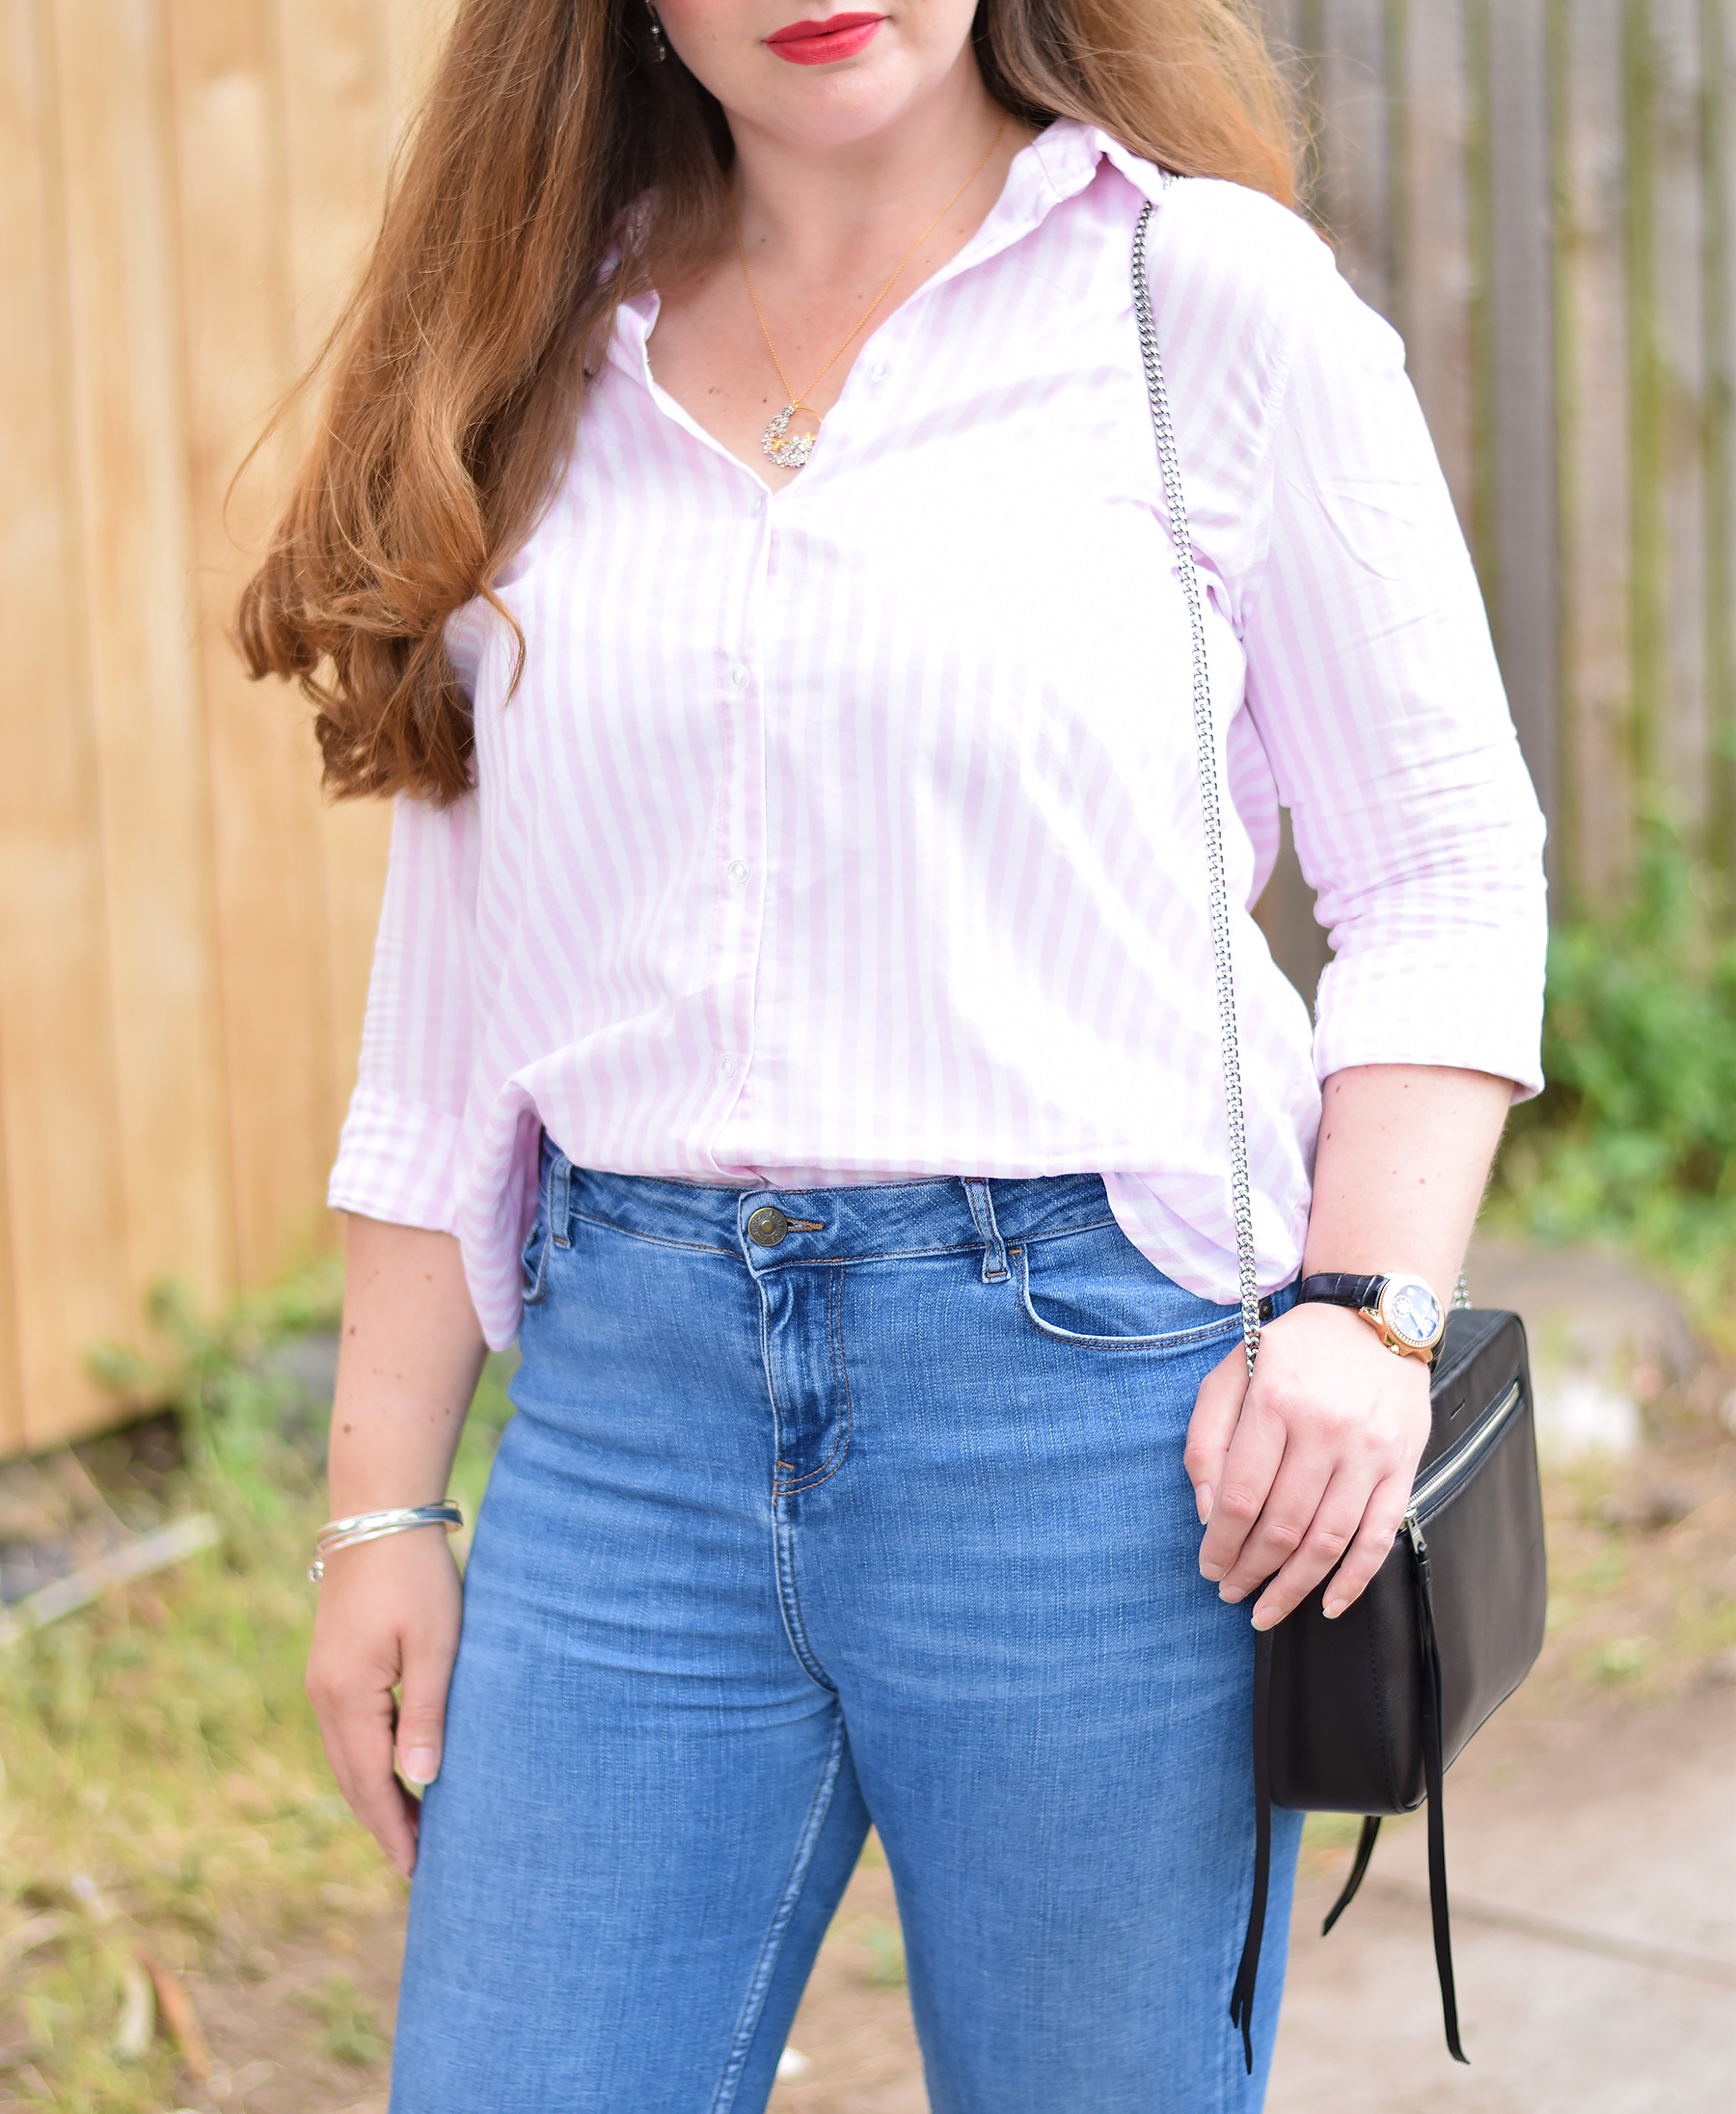 H&M Pink Striped Shirt Outfit 